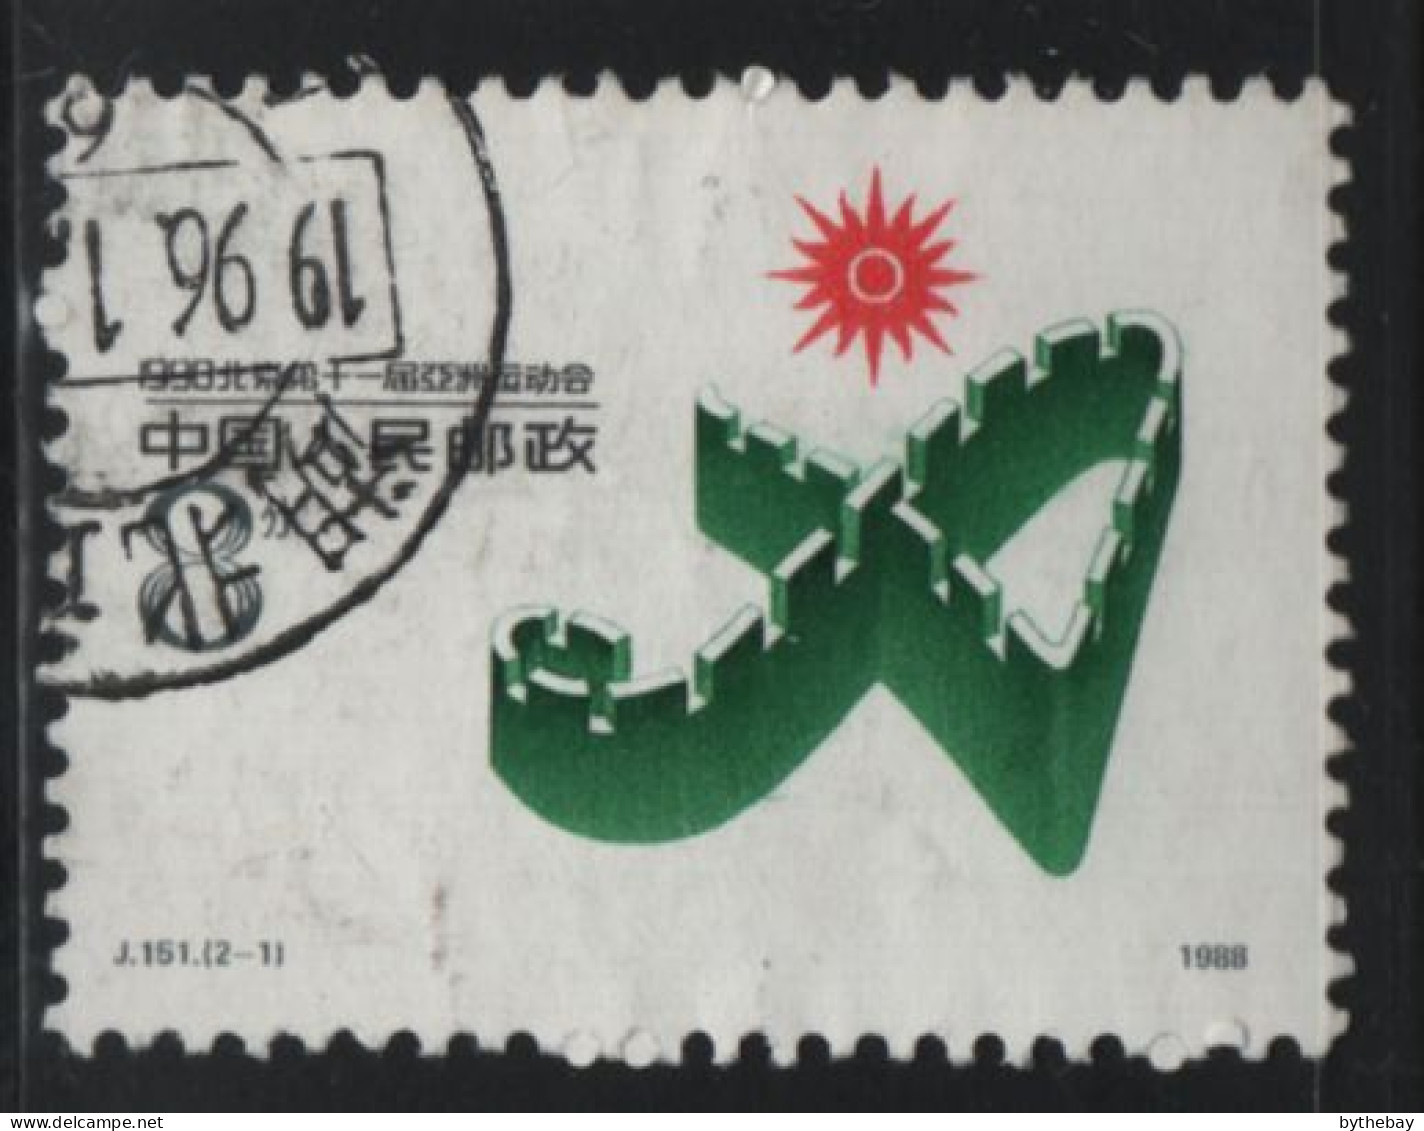 China People's Republic 1988 Used Sc 2158 8f Emblem 11th Asian Games - Used Stamps